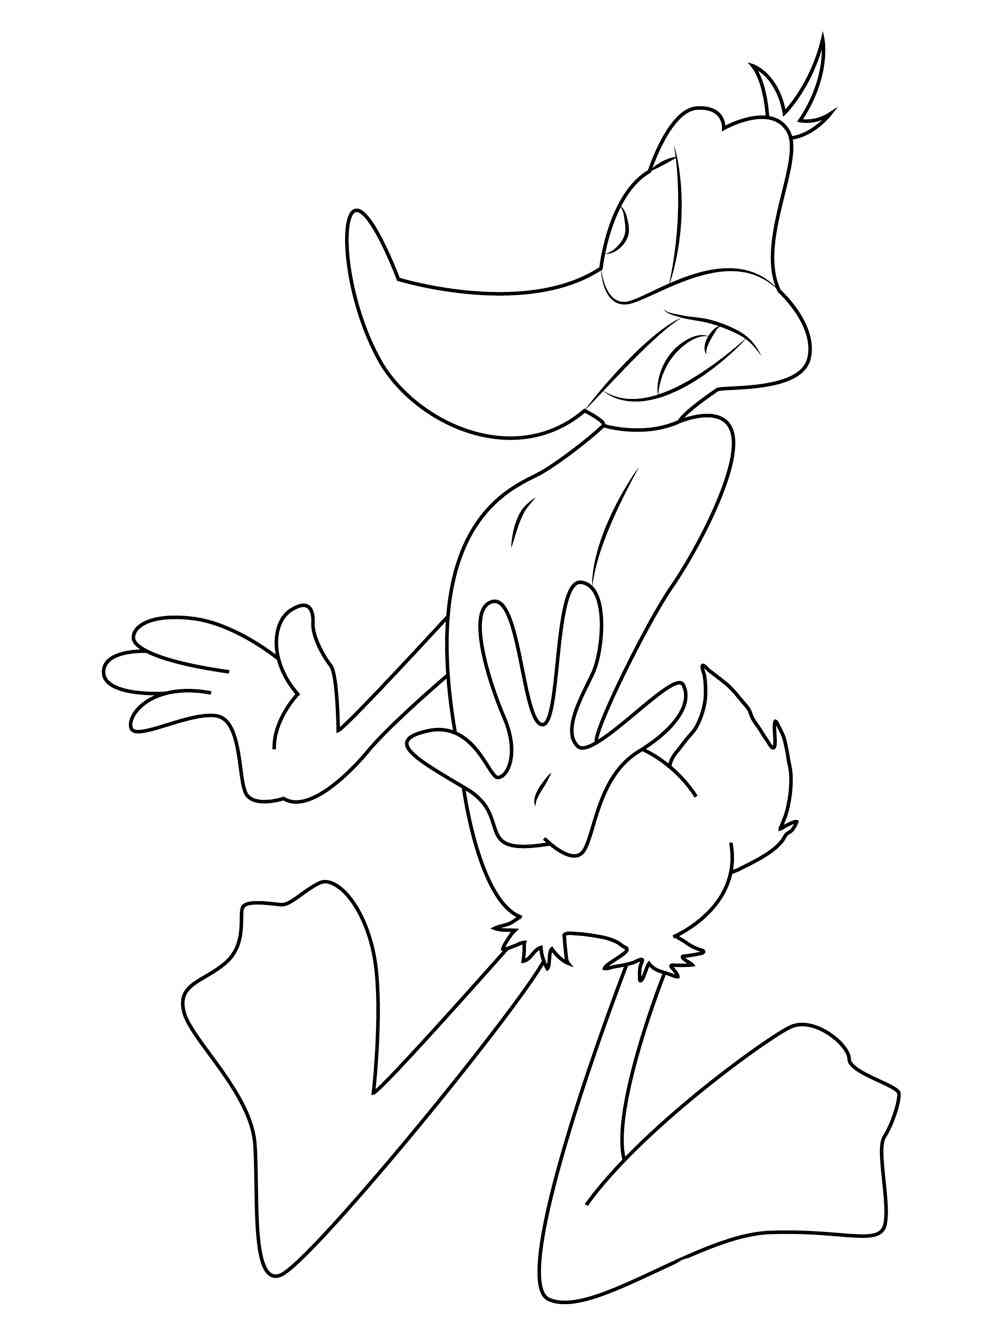 Daffy Duck 15 coloring page